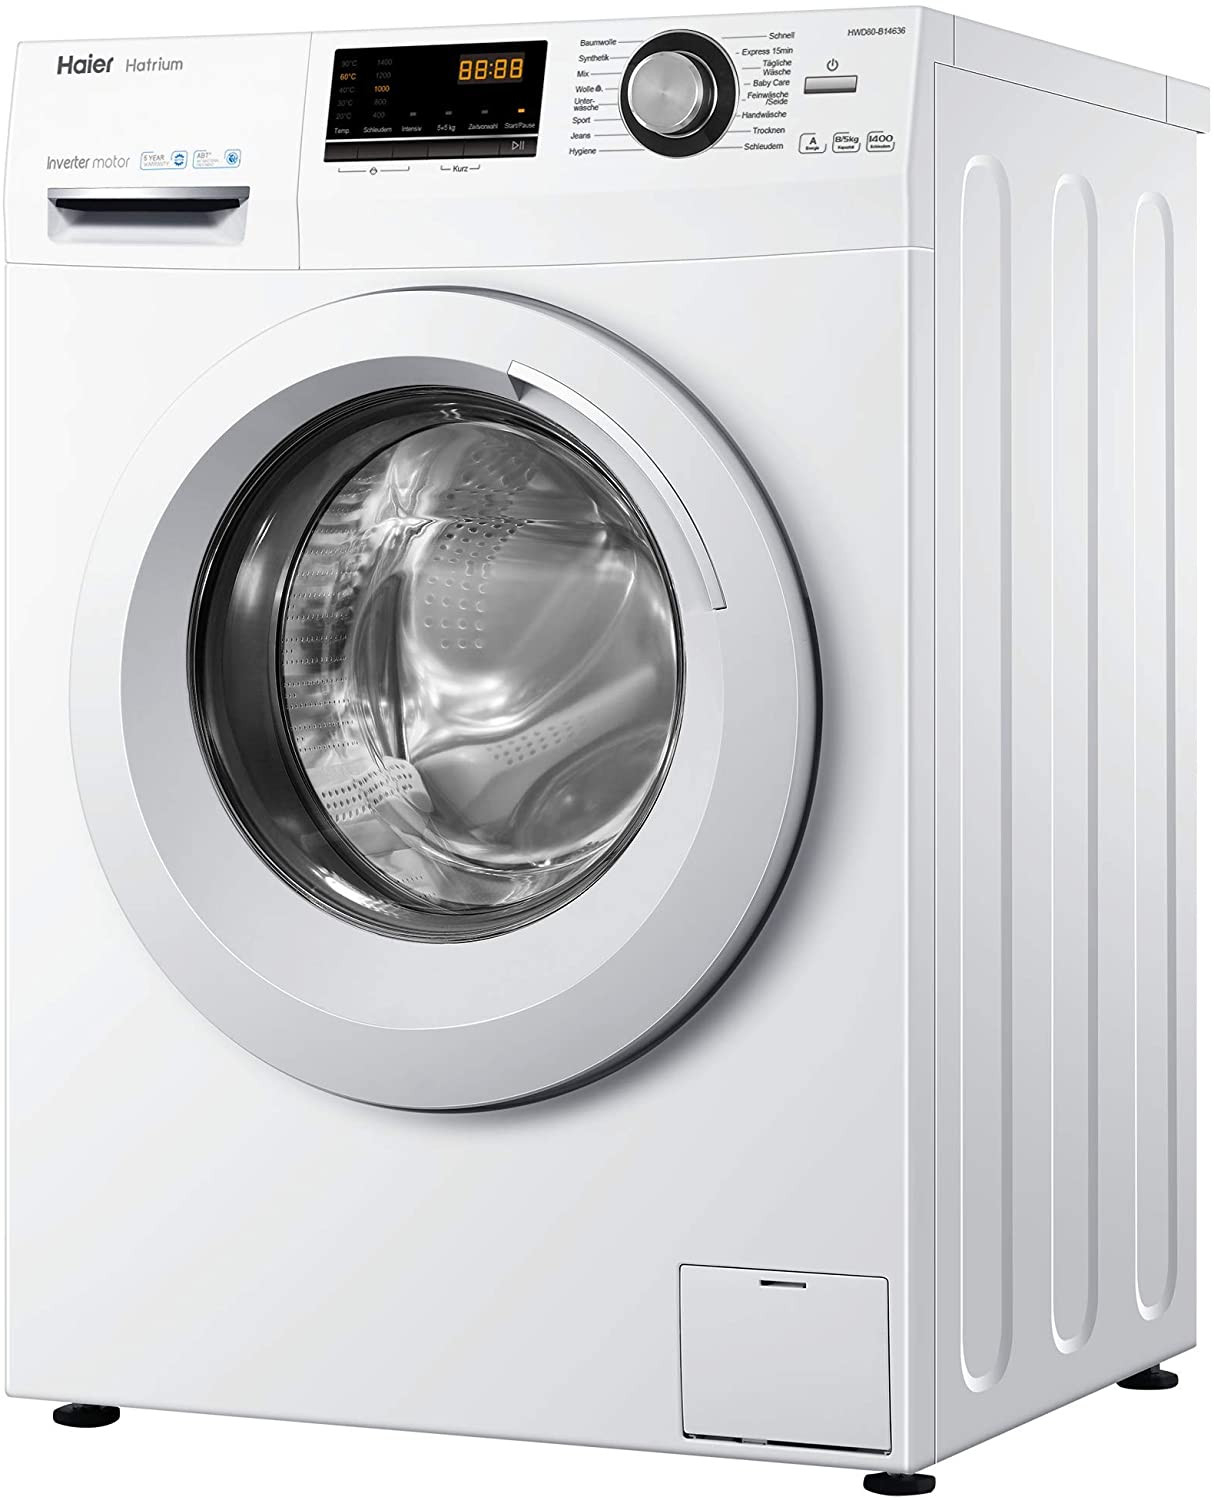 Haier HWD80-B14636 Washing Dryer / A / 1080 kWh per Year / 1400 rpm / 8 kg Wash / 5 kg Dry / End Time Delay / AquaProtect [Energy Class A]